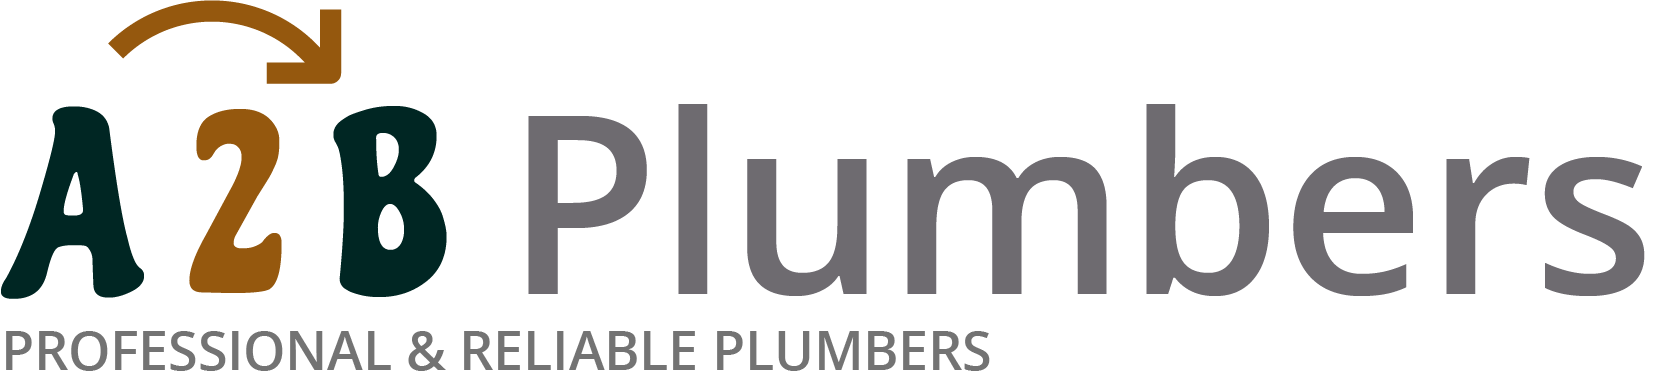 If you need a boiler installed, a radiator repaired or a leaking tap fixed, call us now - we provide services for properties in Biggin Hill and the local area.